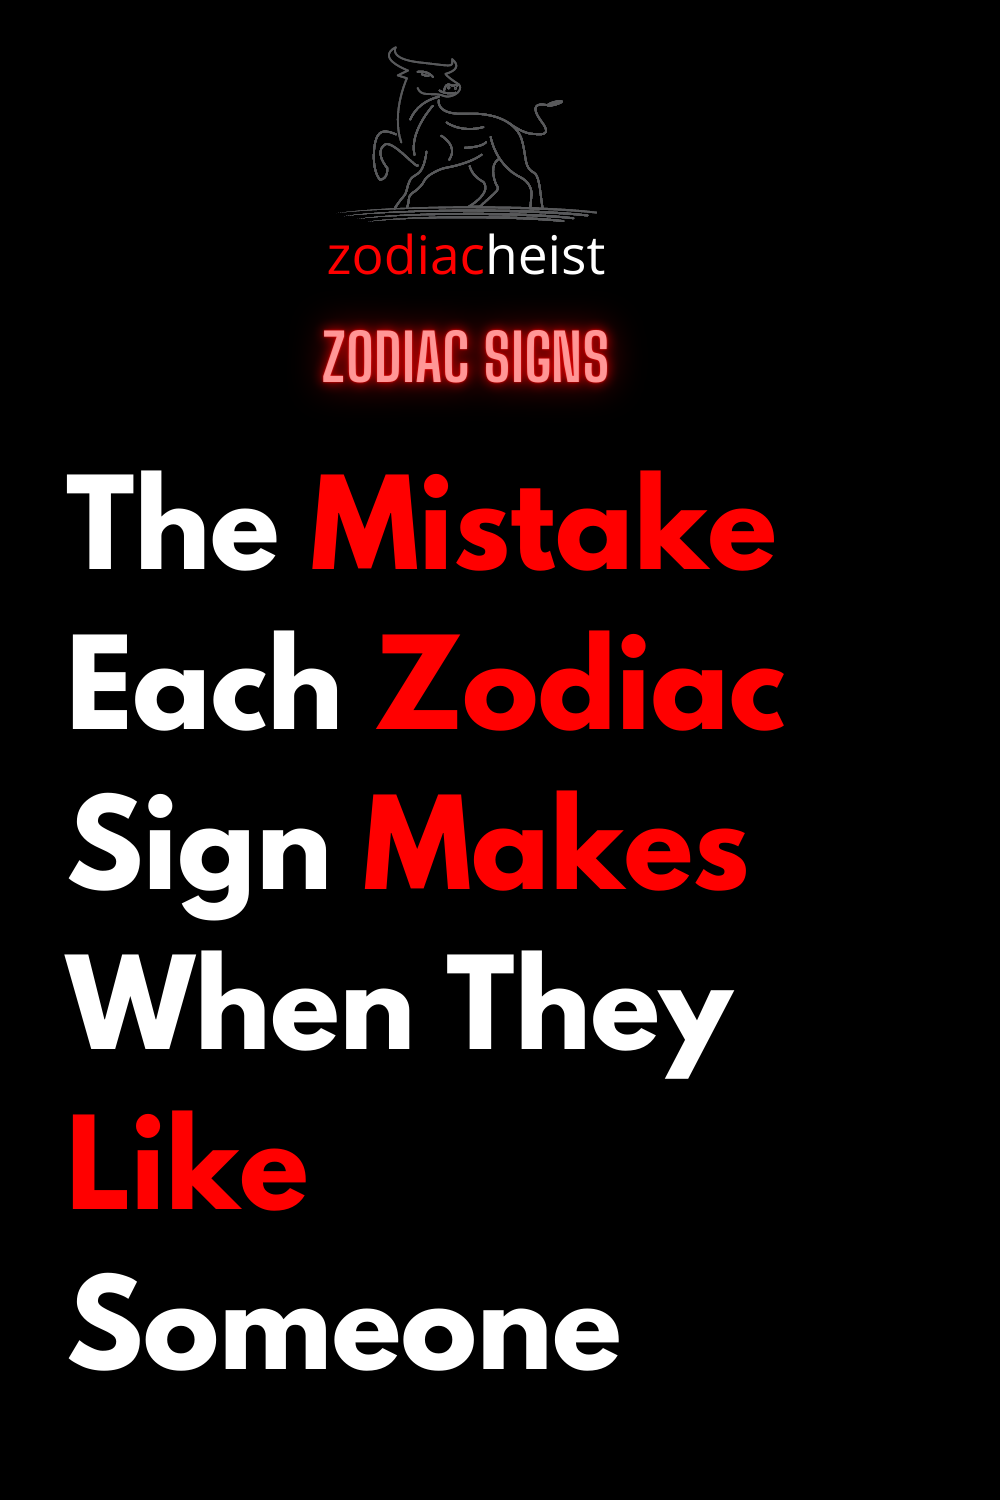 The Mistake Each Zodiac Sign Makes When They Like Someone